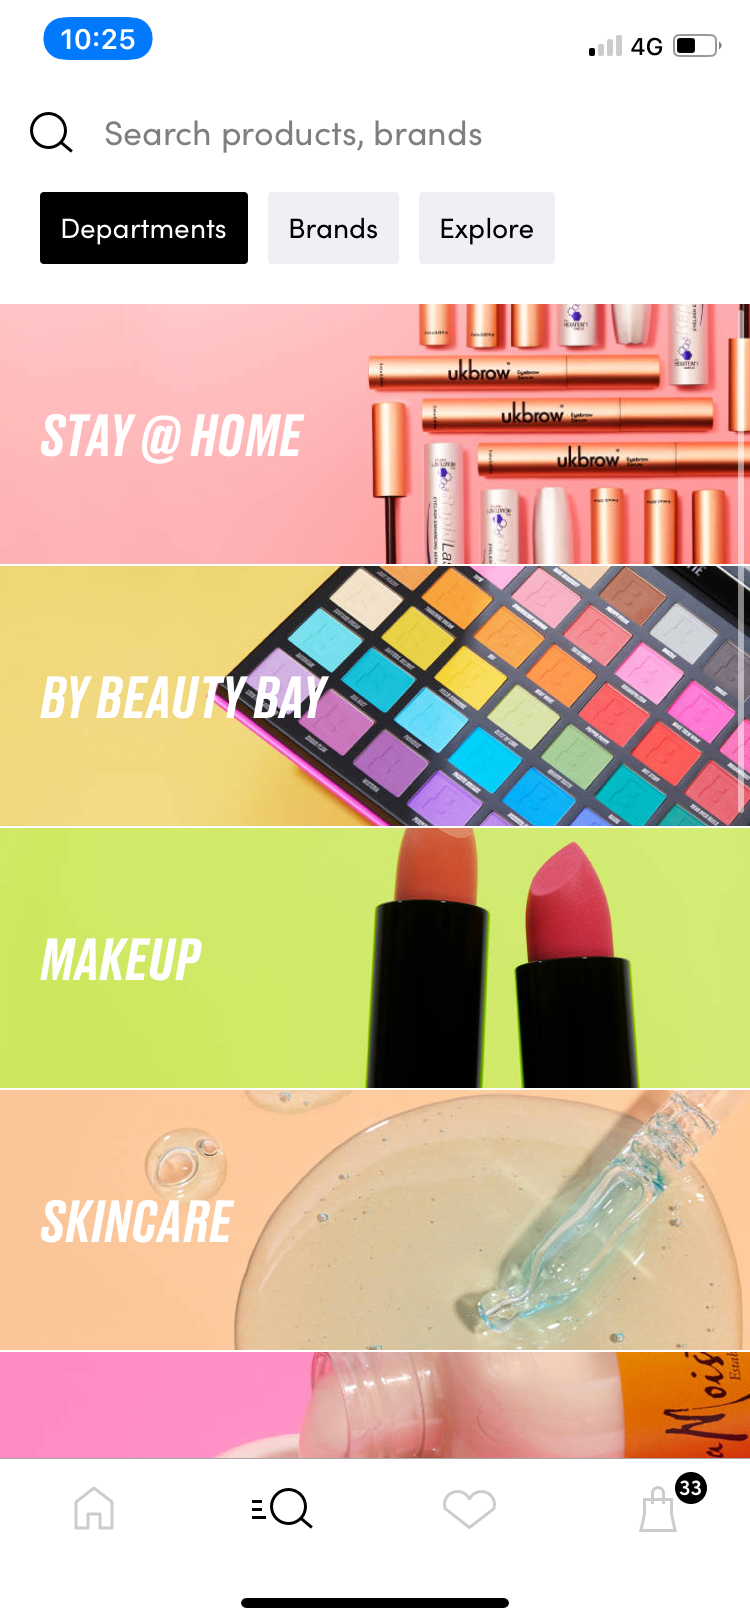 Browse beautybay categories